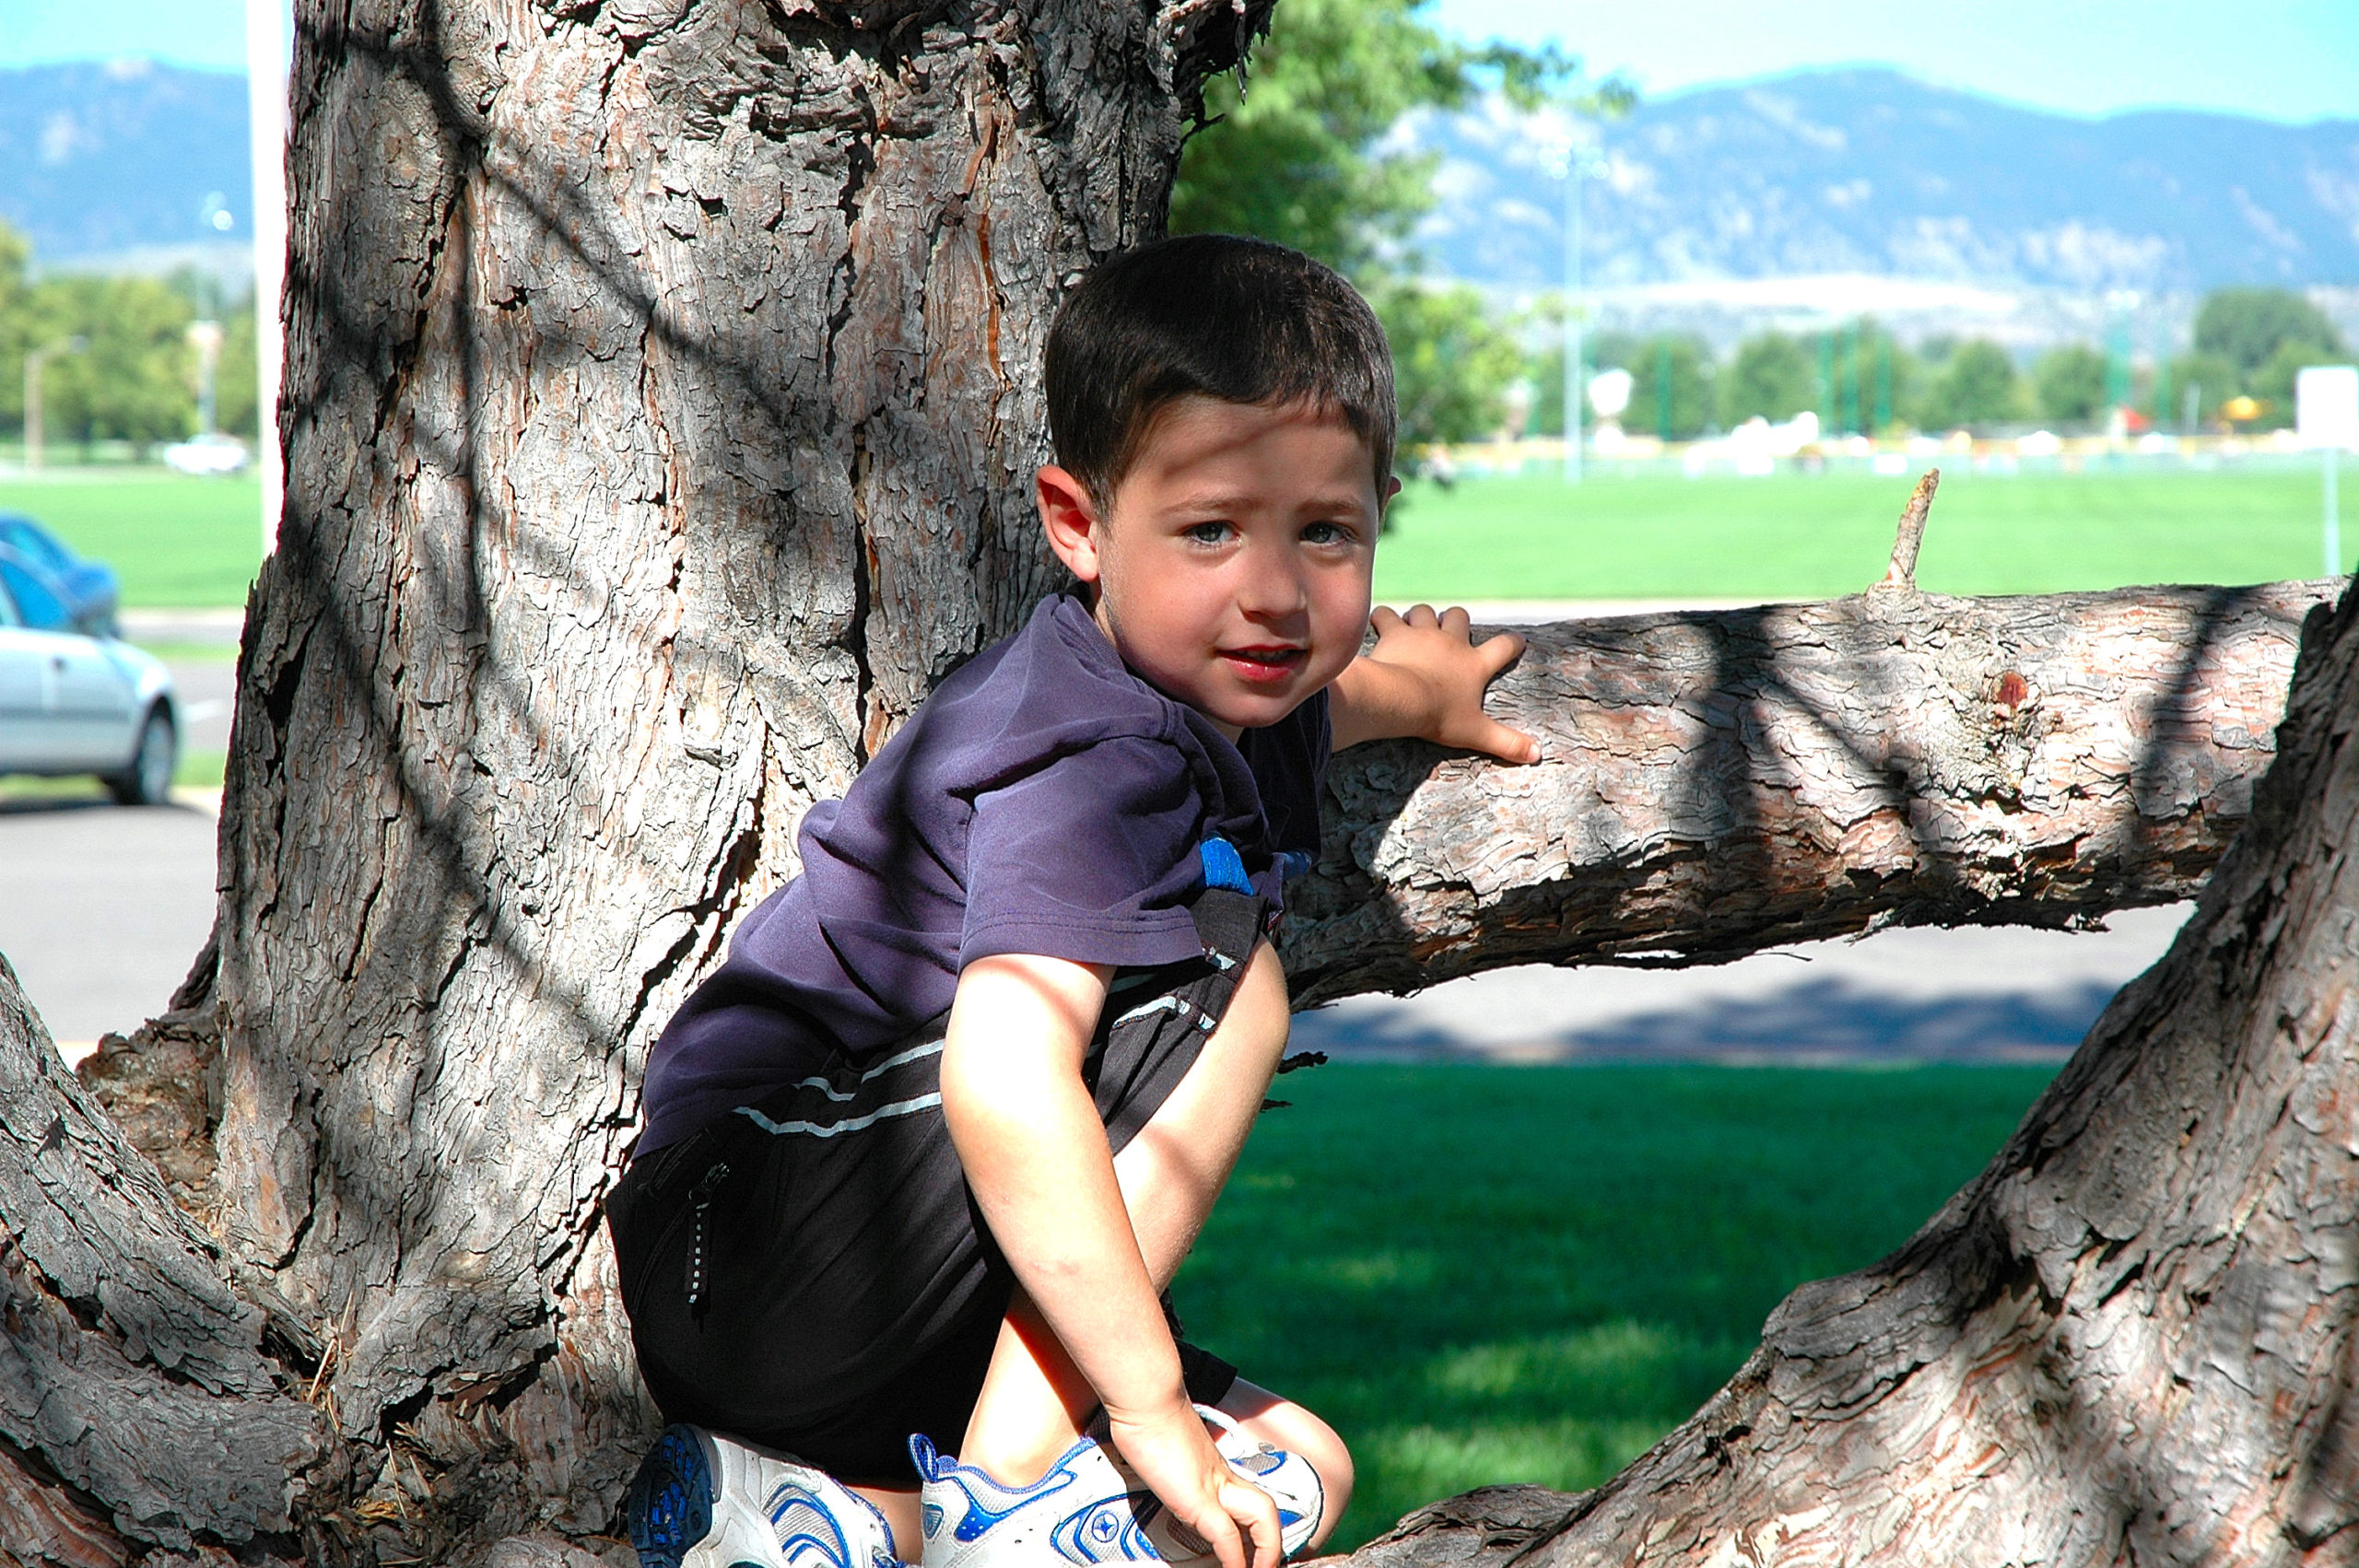 Nevan Doig watching dad from a tree at the cricket at CSU